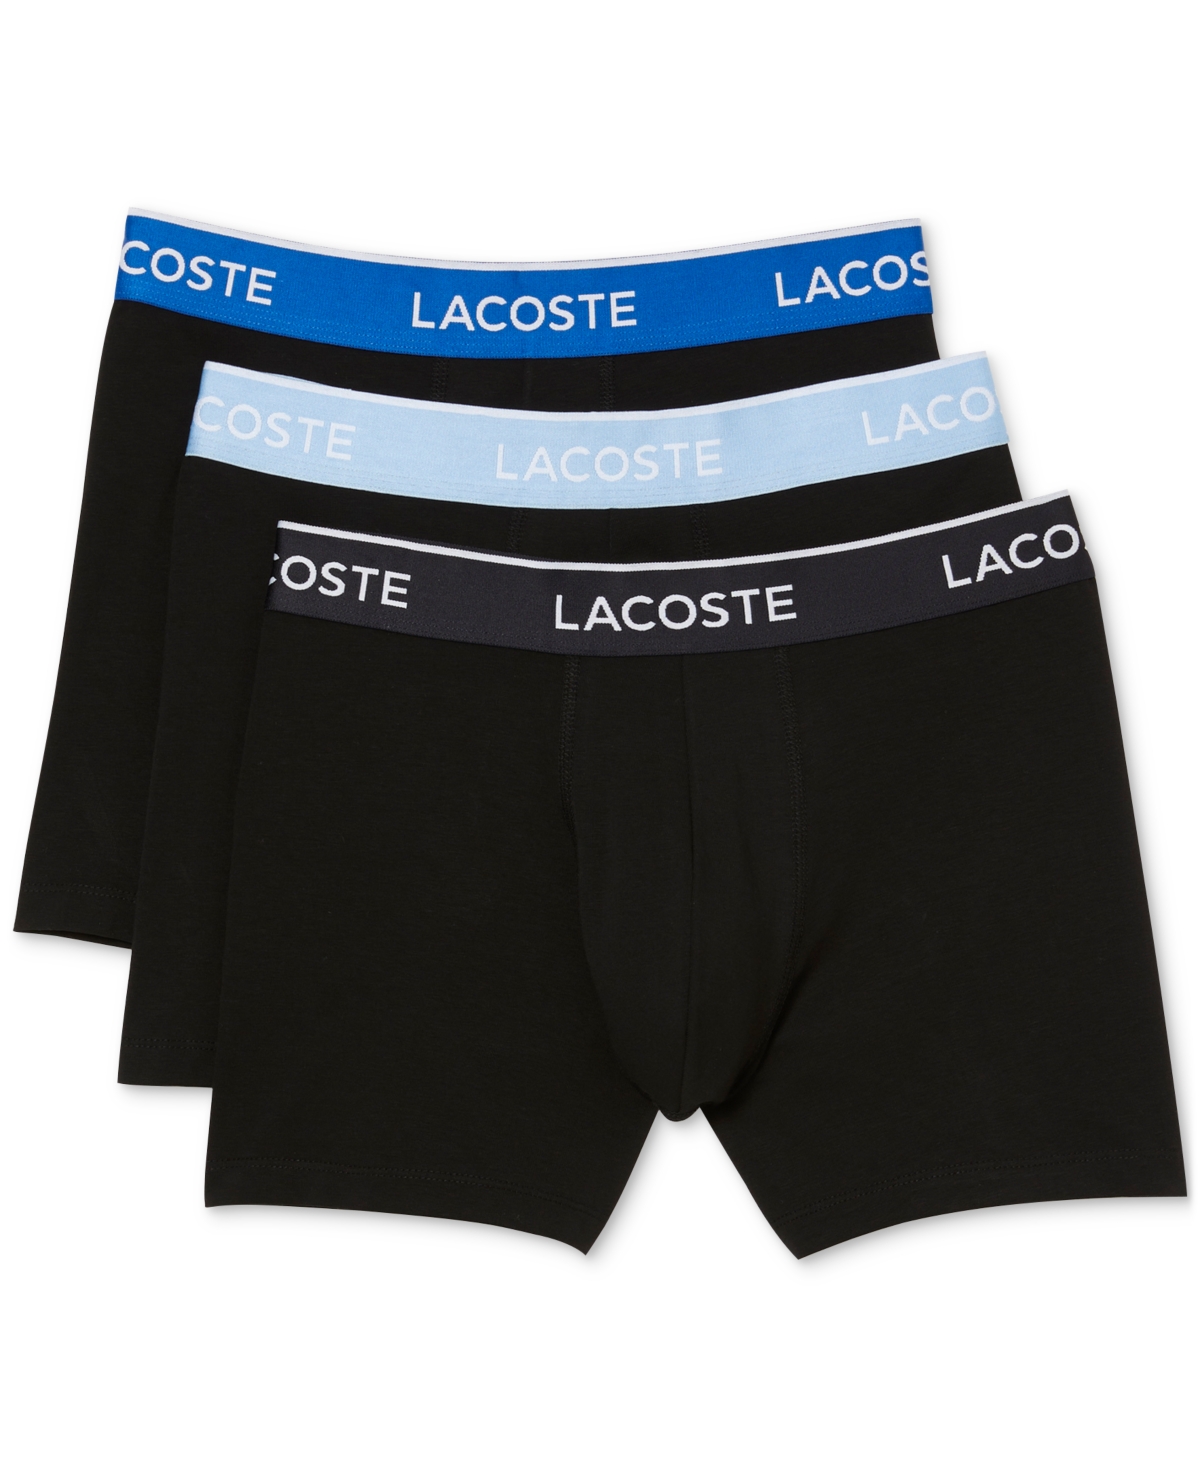 Lacoste Men's Casual Stretch Boxer Brief Set, 3 Pack In Navy Blue,green-red-navy Blue